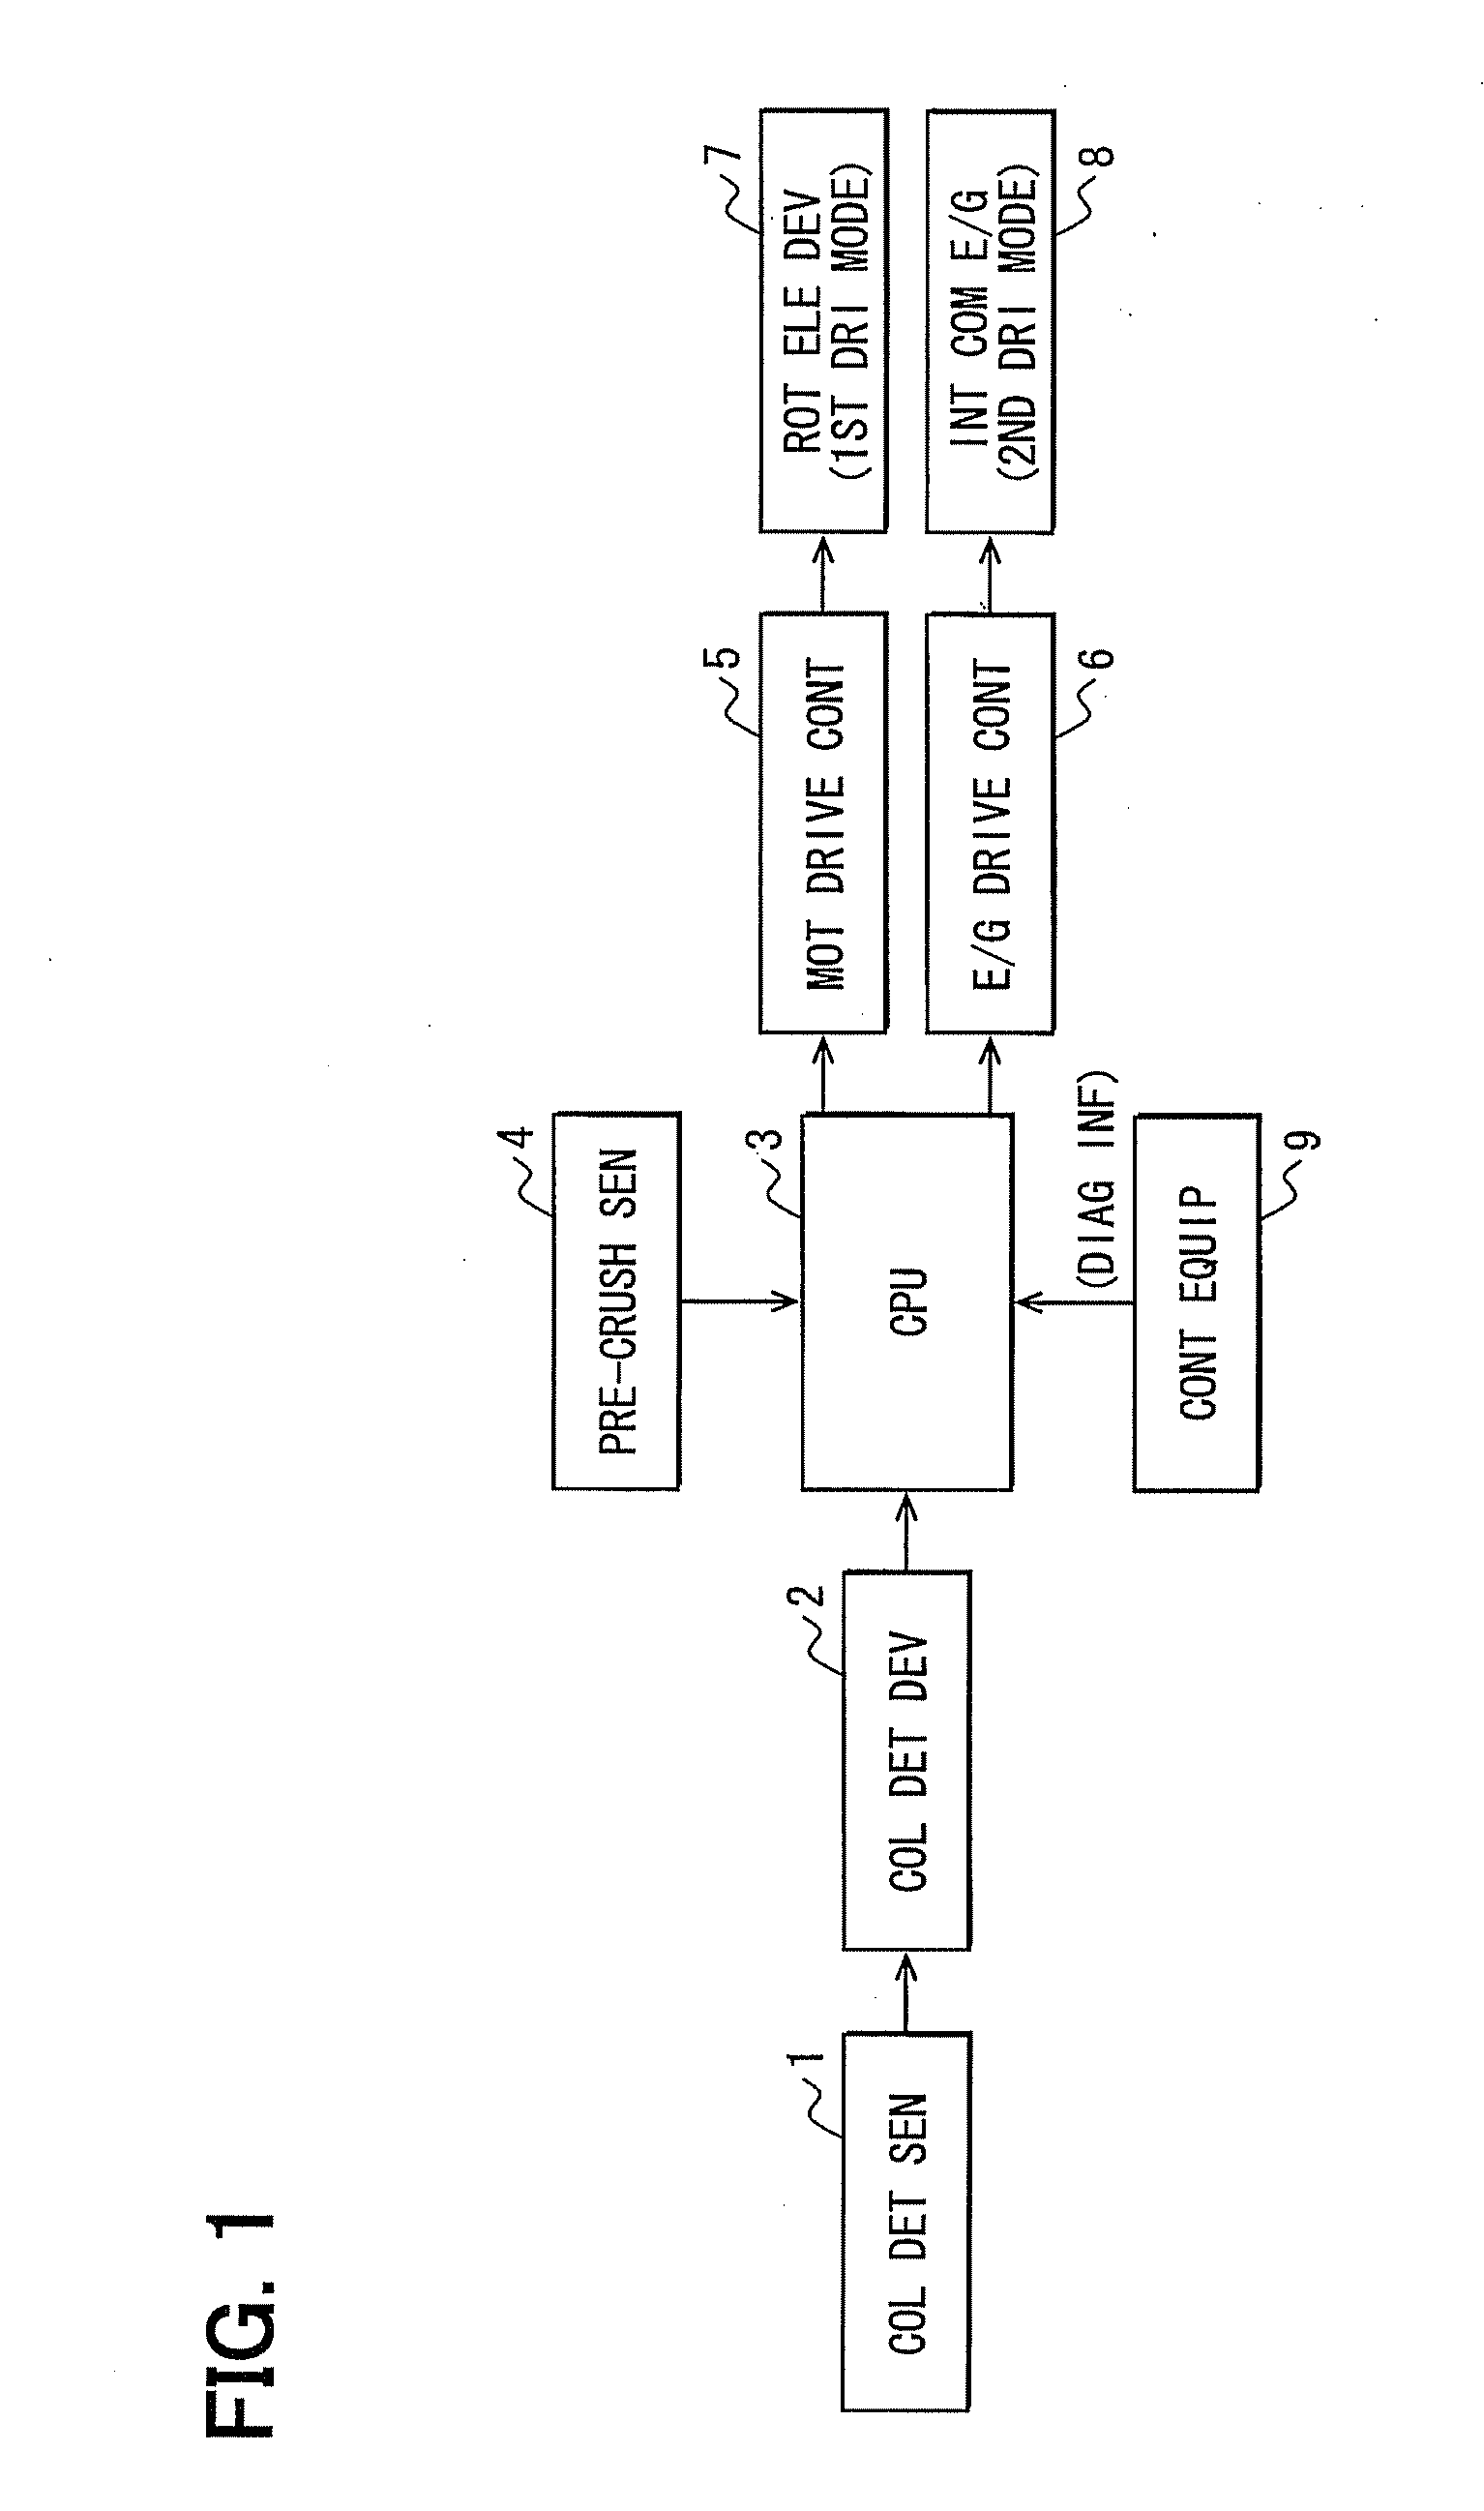 In-vehicle apparatus for detecting collision of vehicle